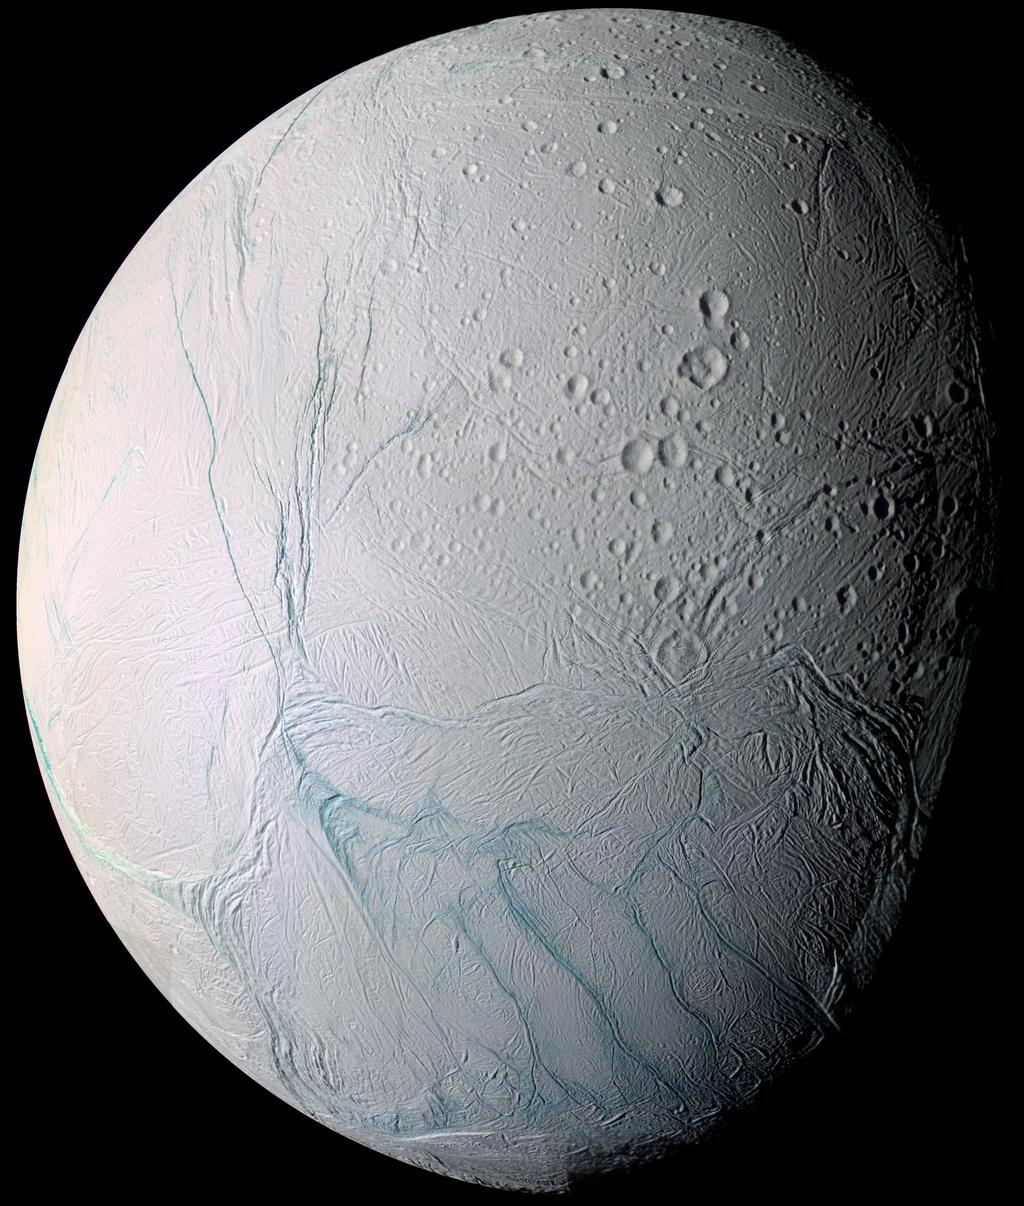 Enceladus Saturnian Moon with water vapor geysers erupting from Tiger Stripes on its South pole Plumes are very likely fed by a liquid subsurface saltwater